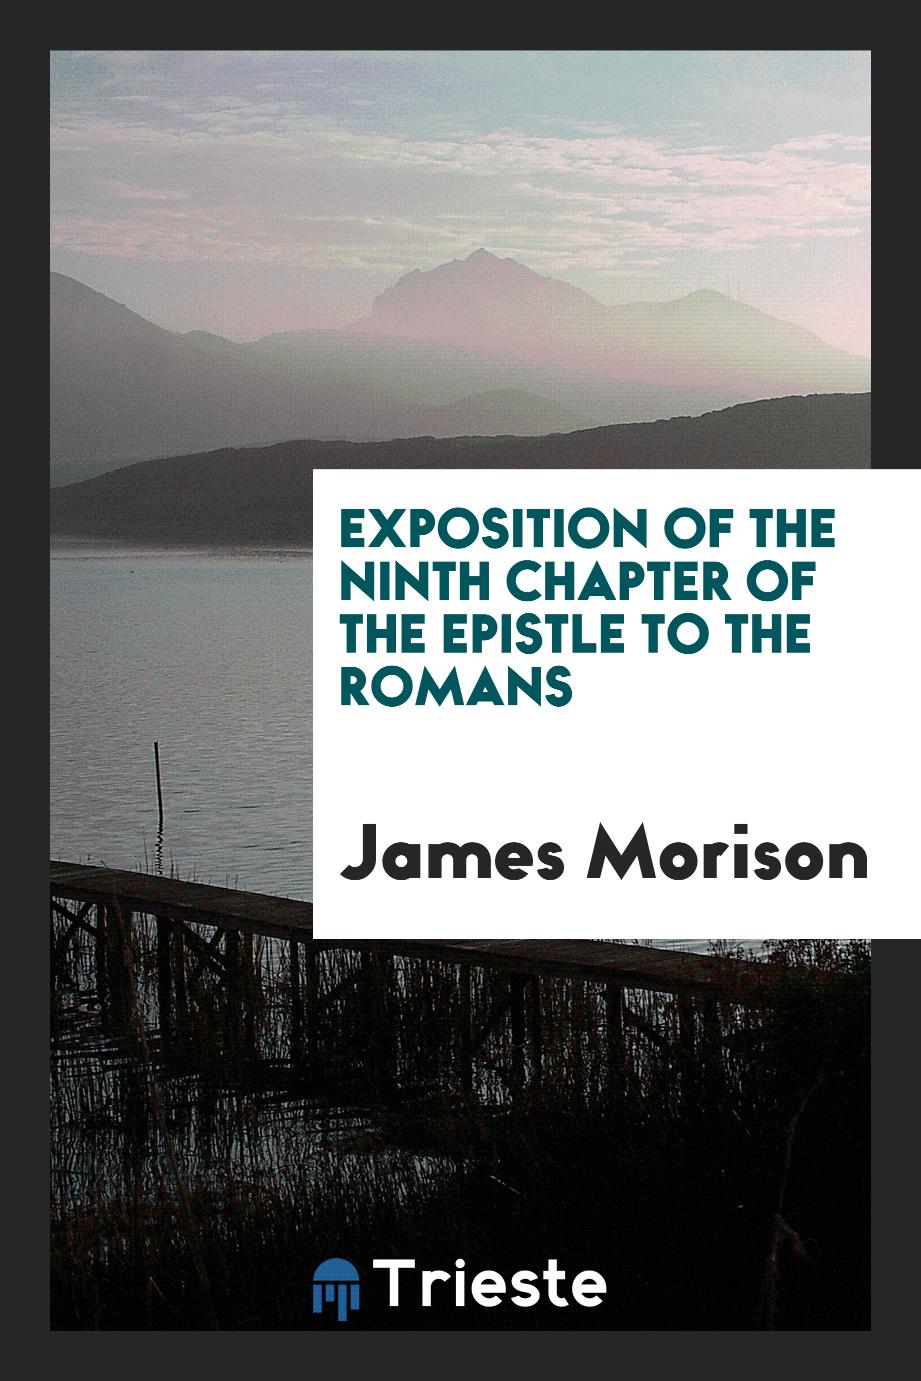 Exposition of the ninth chapter of the Epistle to the Romans